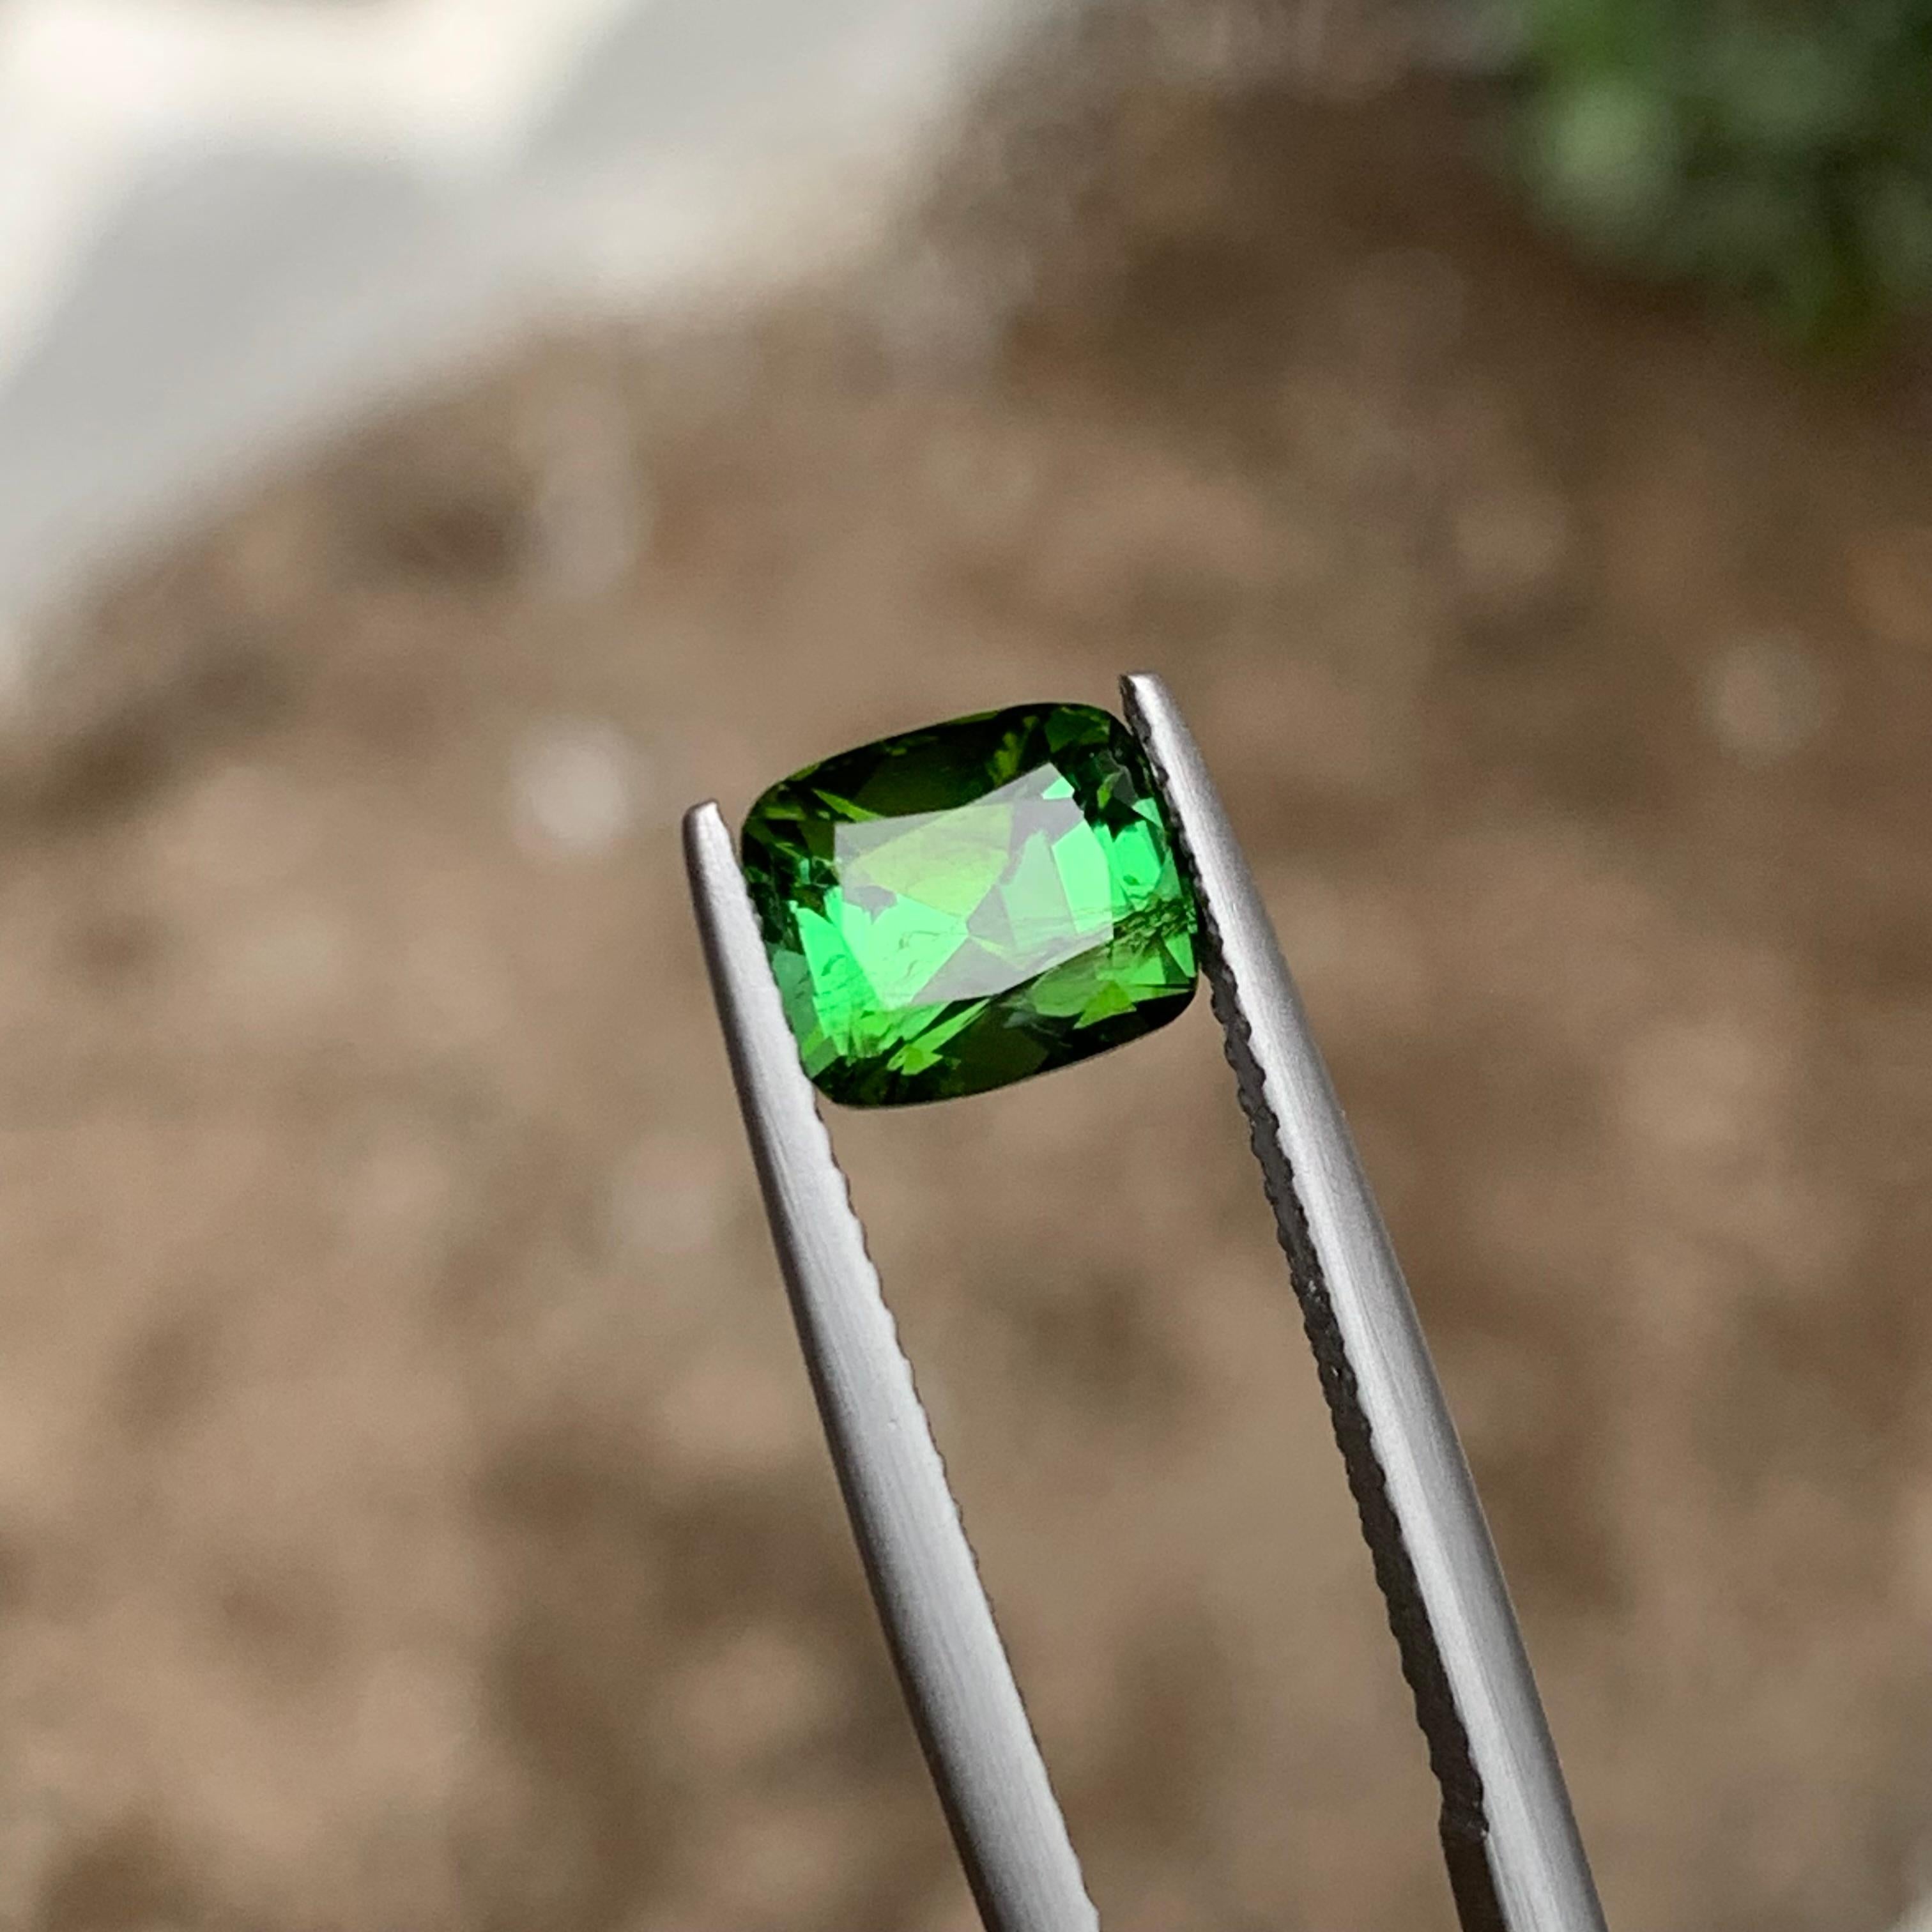 Rare Green Natural Tourmaline Loose Gemstone 2.10Ct Cushion Cut for Ring/Jewelry For Sale 3